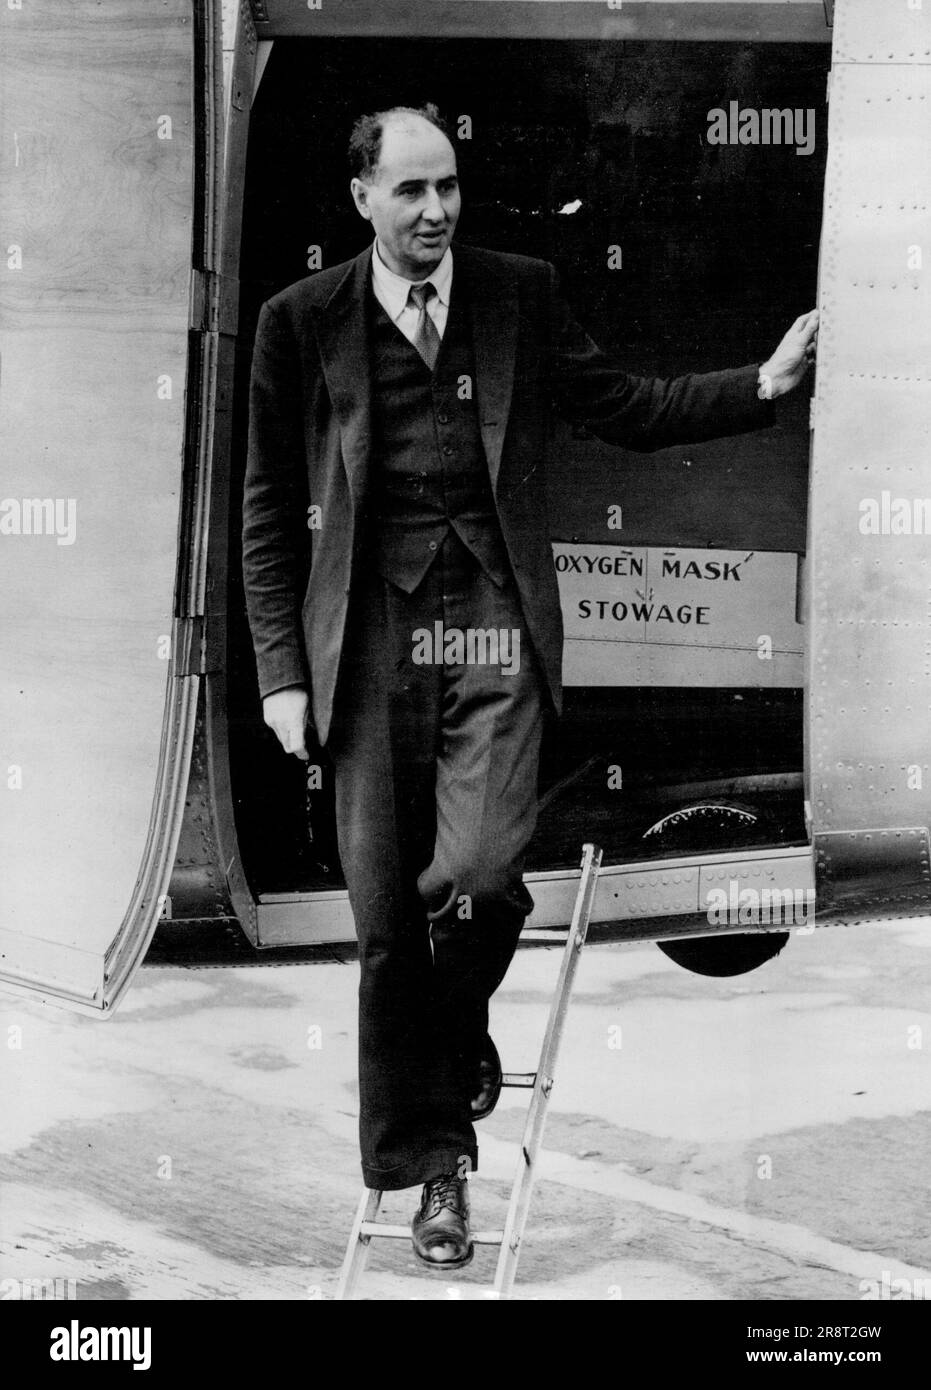 Food Minister Arrives By Air From Canada -- Mr. John Strachey leaving the aircraft on his arrival at Heath Row. Mr. John Strachey, Minister of Food, arrived at Heath Row airport, London, from Canada after his food talks in Washington, D.C., and Ottawa. The Minister is reported to have returned without the expected signatures to the wheat agreement between Britain and Canada. Following Mr. Strachey's return, the cabinet will make a final decision on bread rationing. June 26, 1946. (Photo by Planet News). Stock Photo